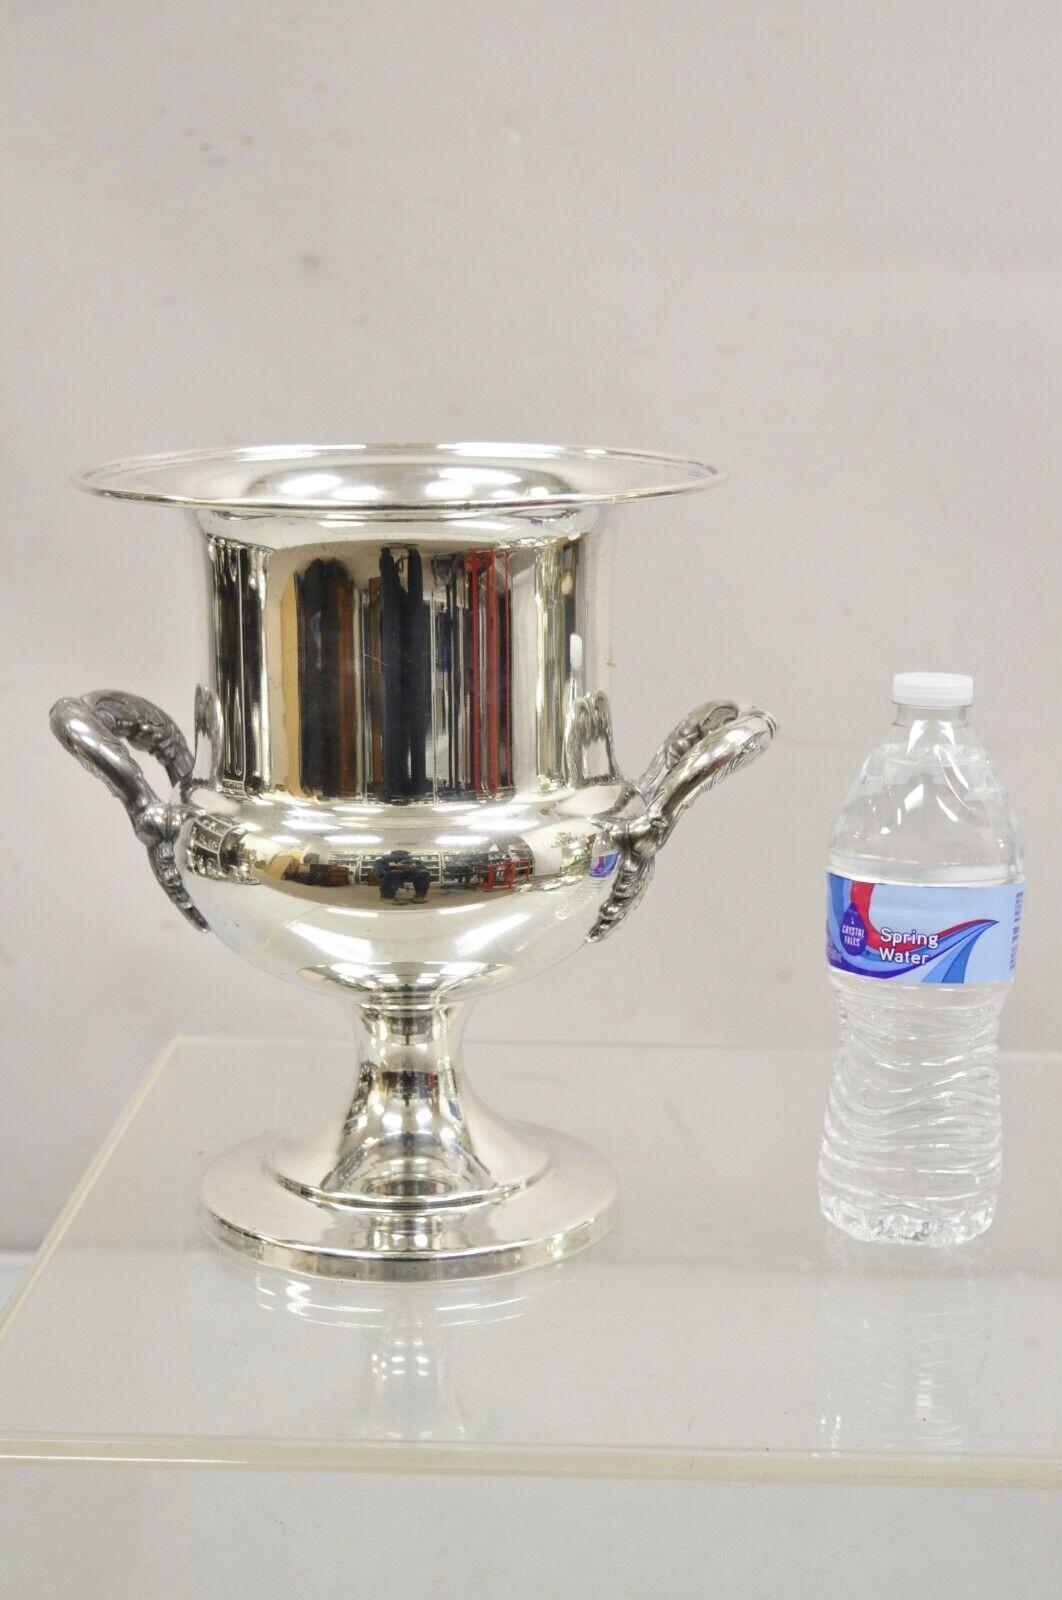 Vintage Regency Style Silver Plated Twin Handles Trophy Cup Champagne Chiller Ice Bucket. Circa Mid 20th Century. Measurements: 10.5